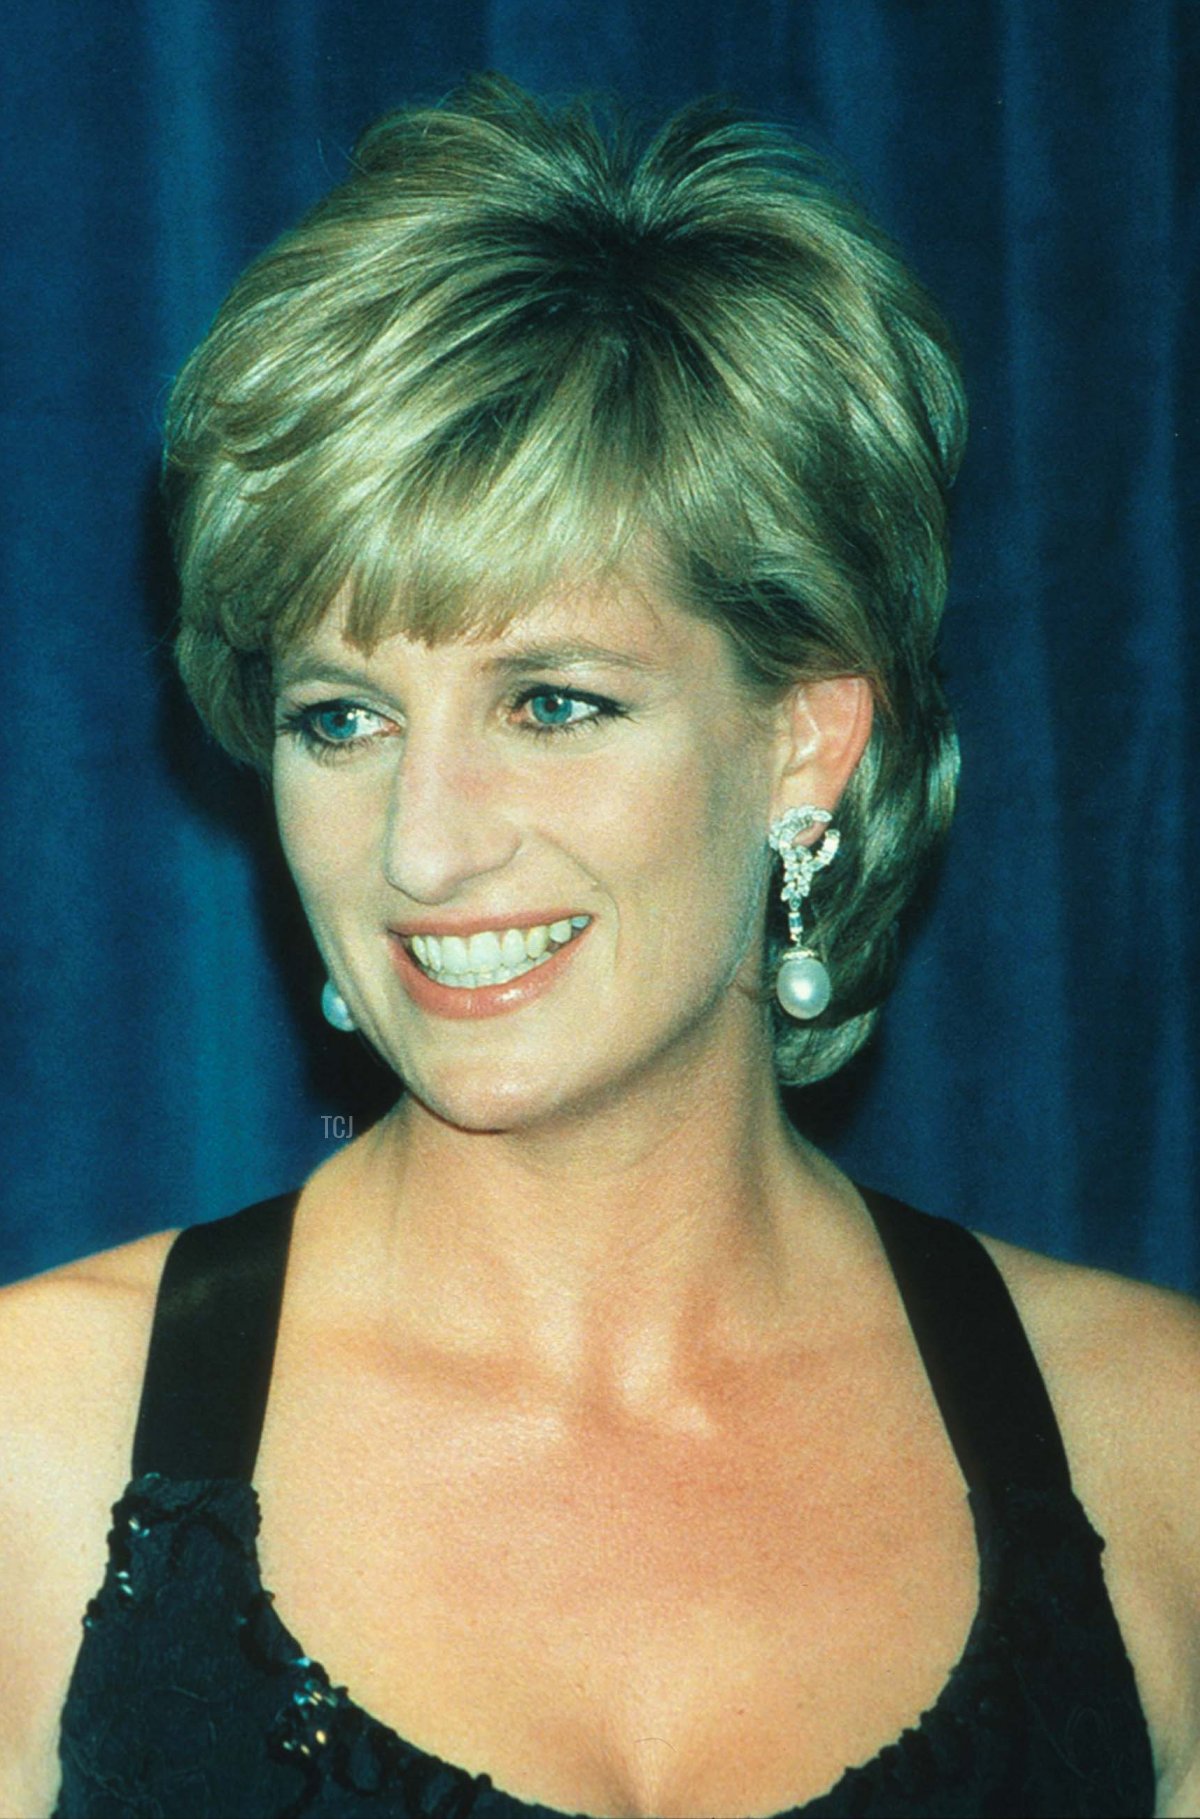 Lady Diana Spencer smiles at the 41st annual United Cerebral Palsy Awards gala December 11, 1995 in New York City. Lady Diana, the Princess of Wales, received the UCP Humanitarian Award at the fundraising evening